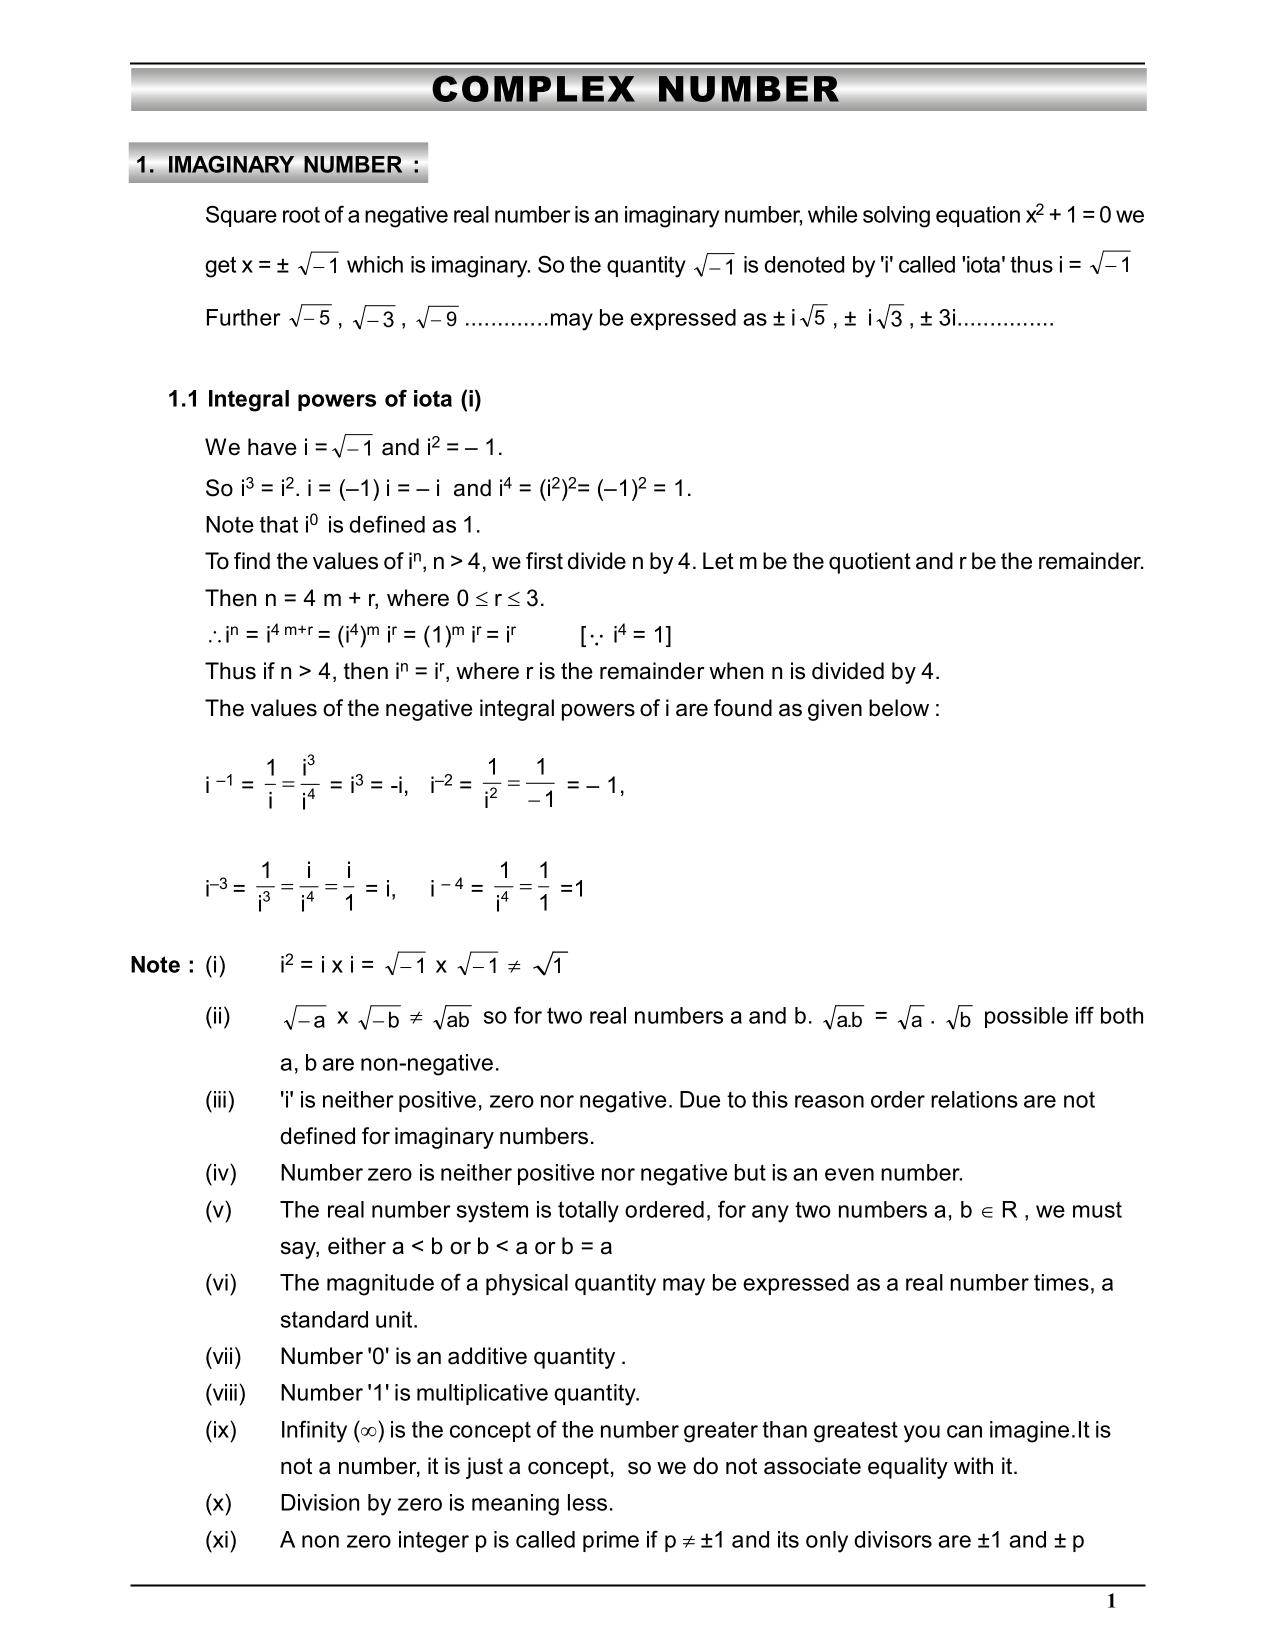 case study questions on complex numbers class 11